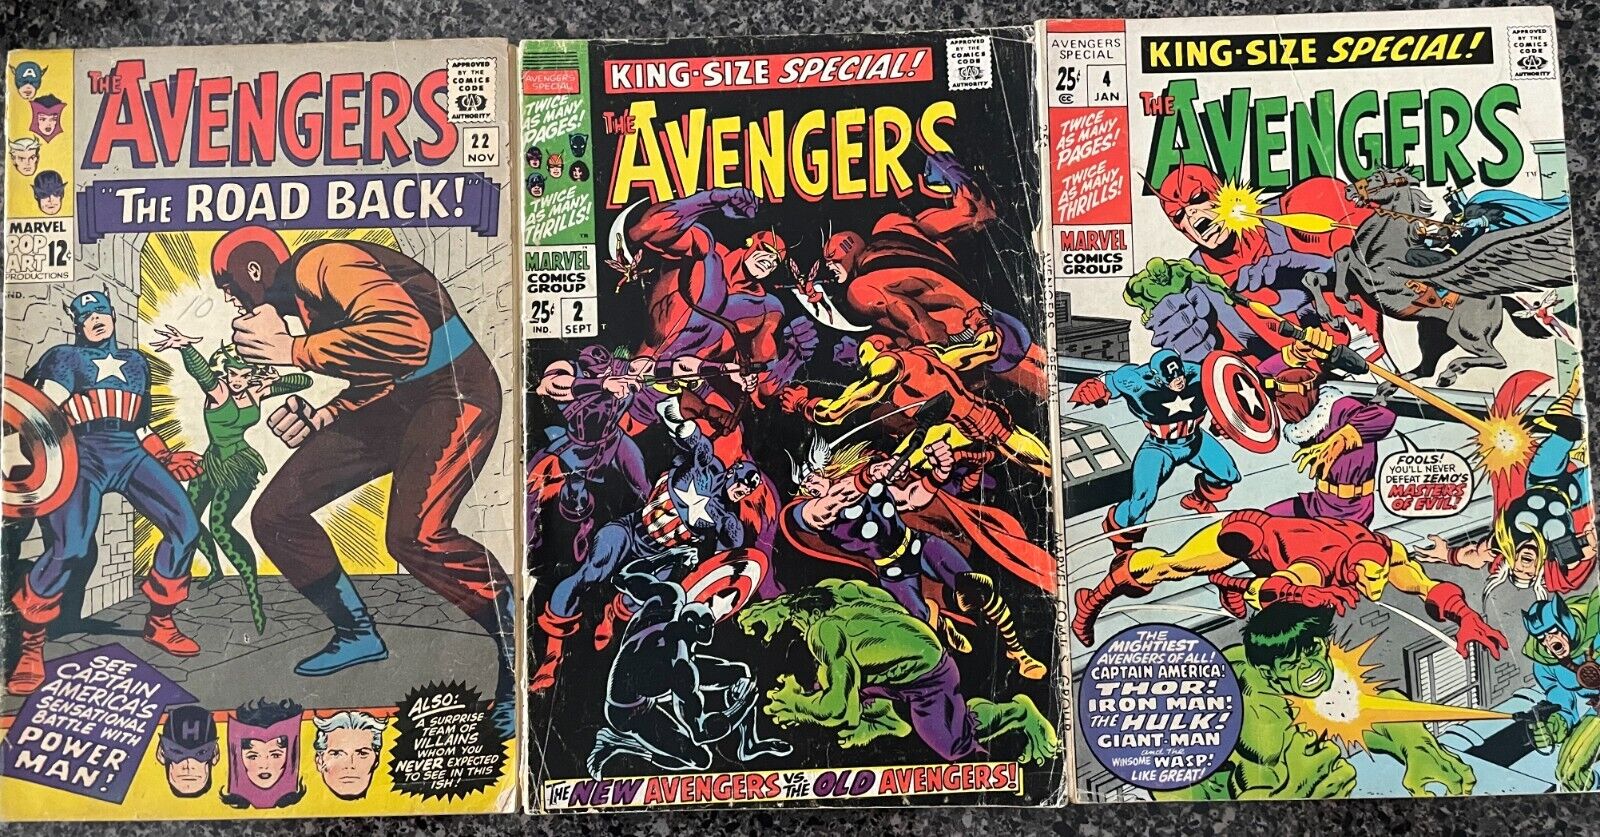 Avengers #22 and Avengers King-Size Special #2 and 4